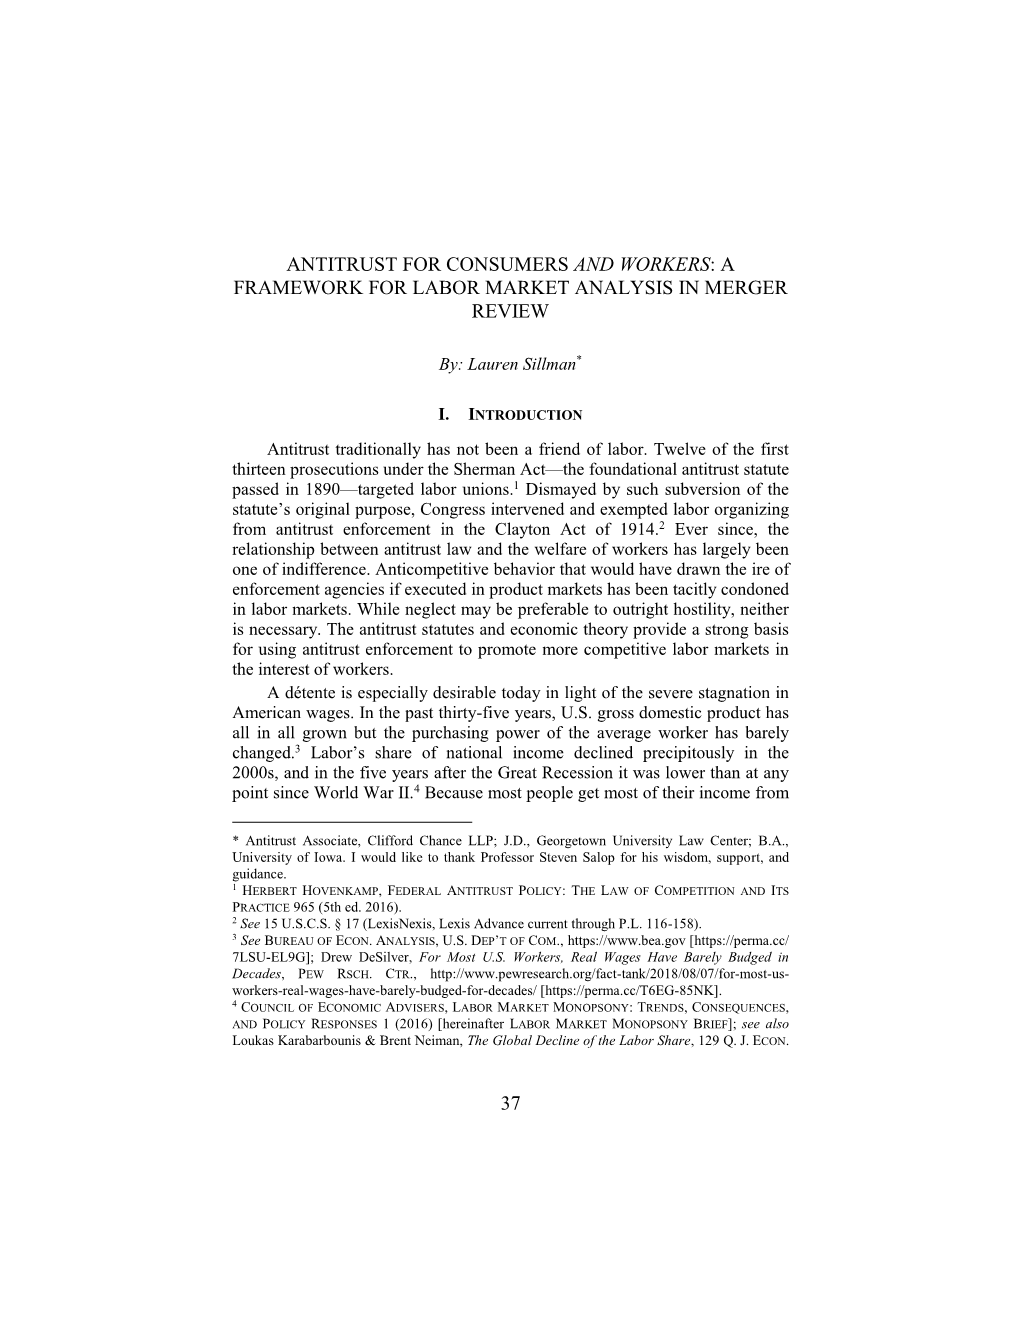 Antitrust for Consumers and Workers: a Framework for Labor Market Analysis in Merger Review